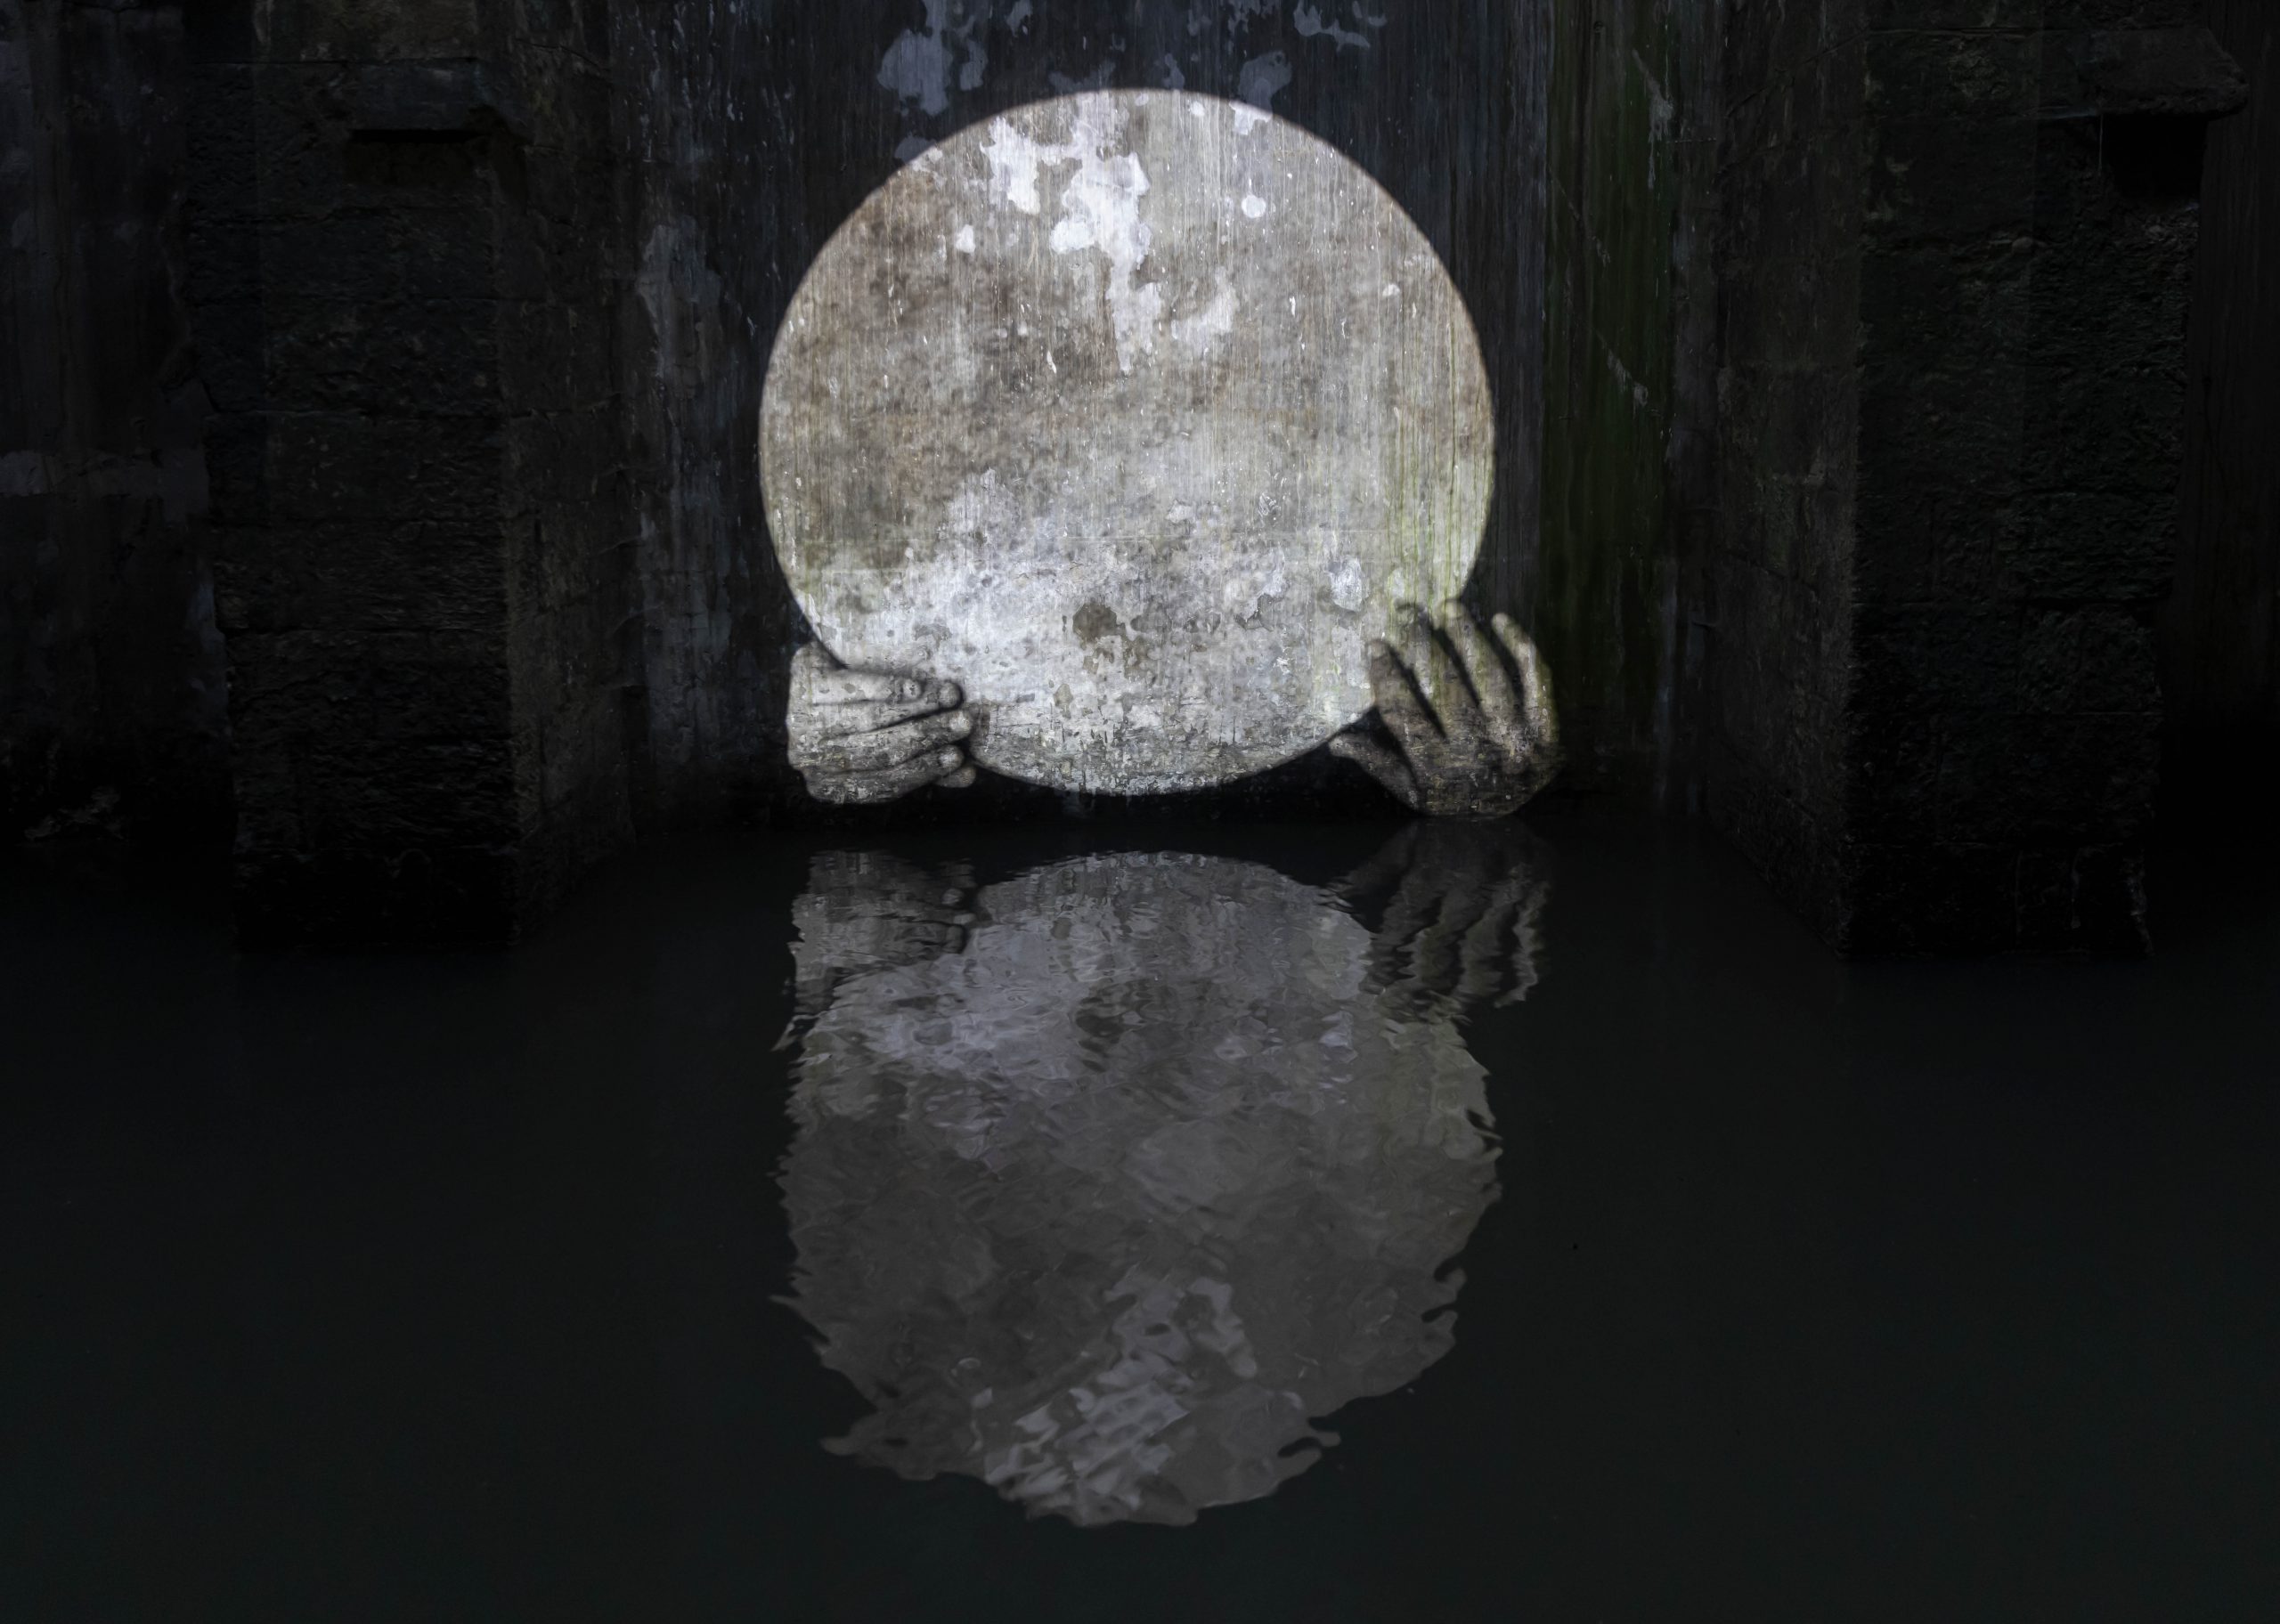 Reflection, Multichannel audiovisual installation, 21 minutes, The Arches Pool (installation view). Photo by Ron Peled